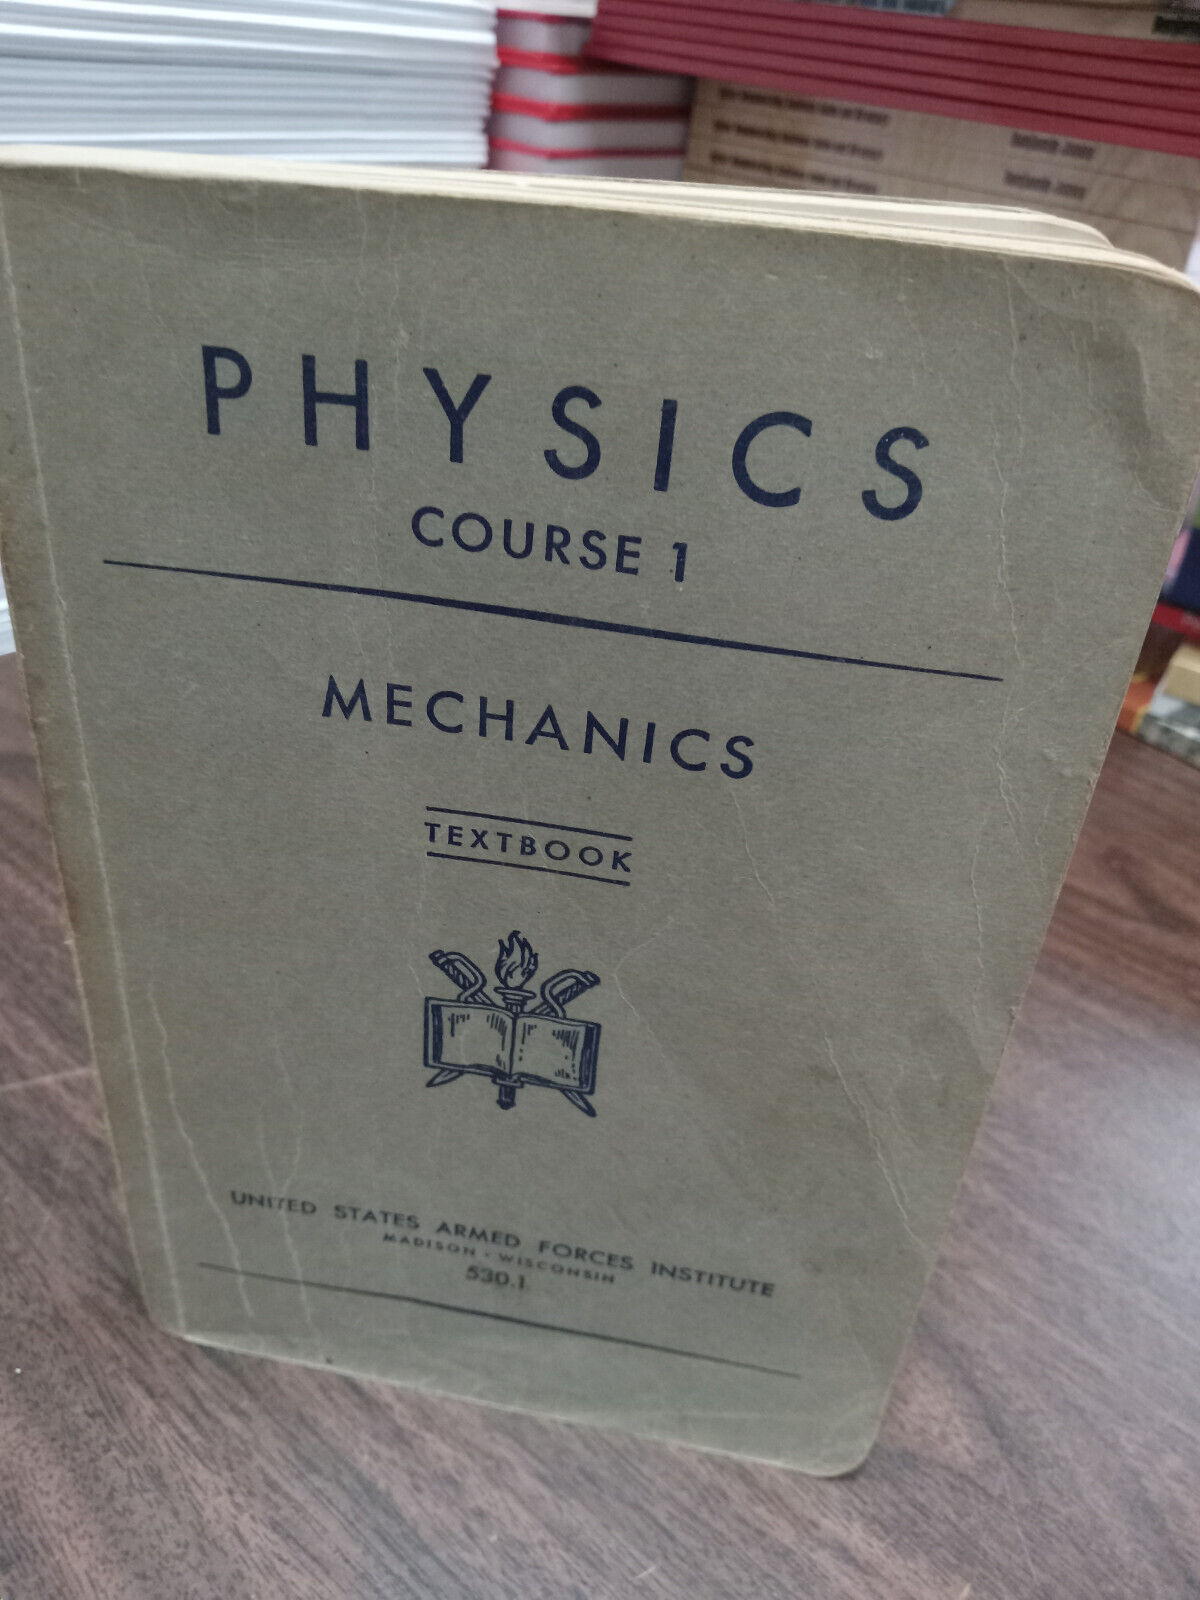 1943 - WW2 Physics Course 1 Textbook Mechanics US Armed Forces Institute 530.1